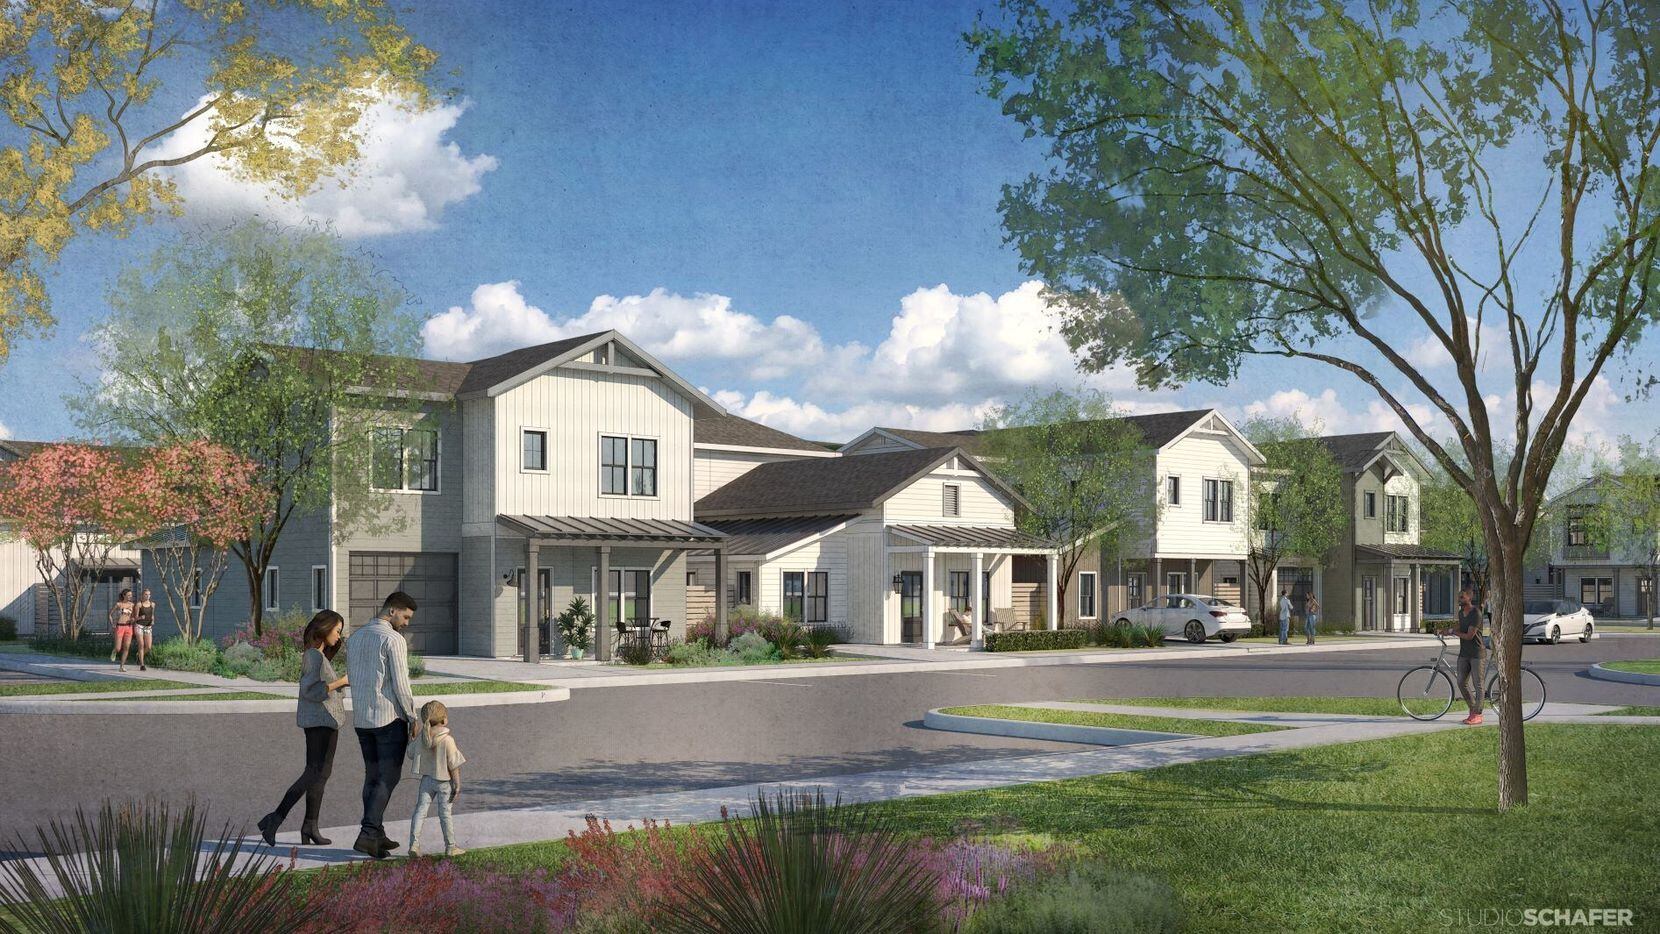 San Antonio developer Embrey is planning Collection at Gruene, a community of duplexes in...